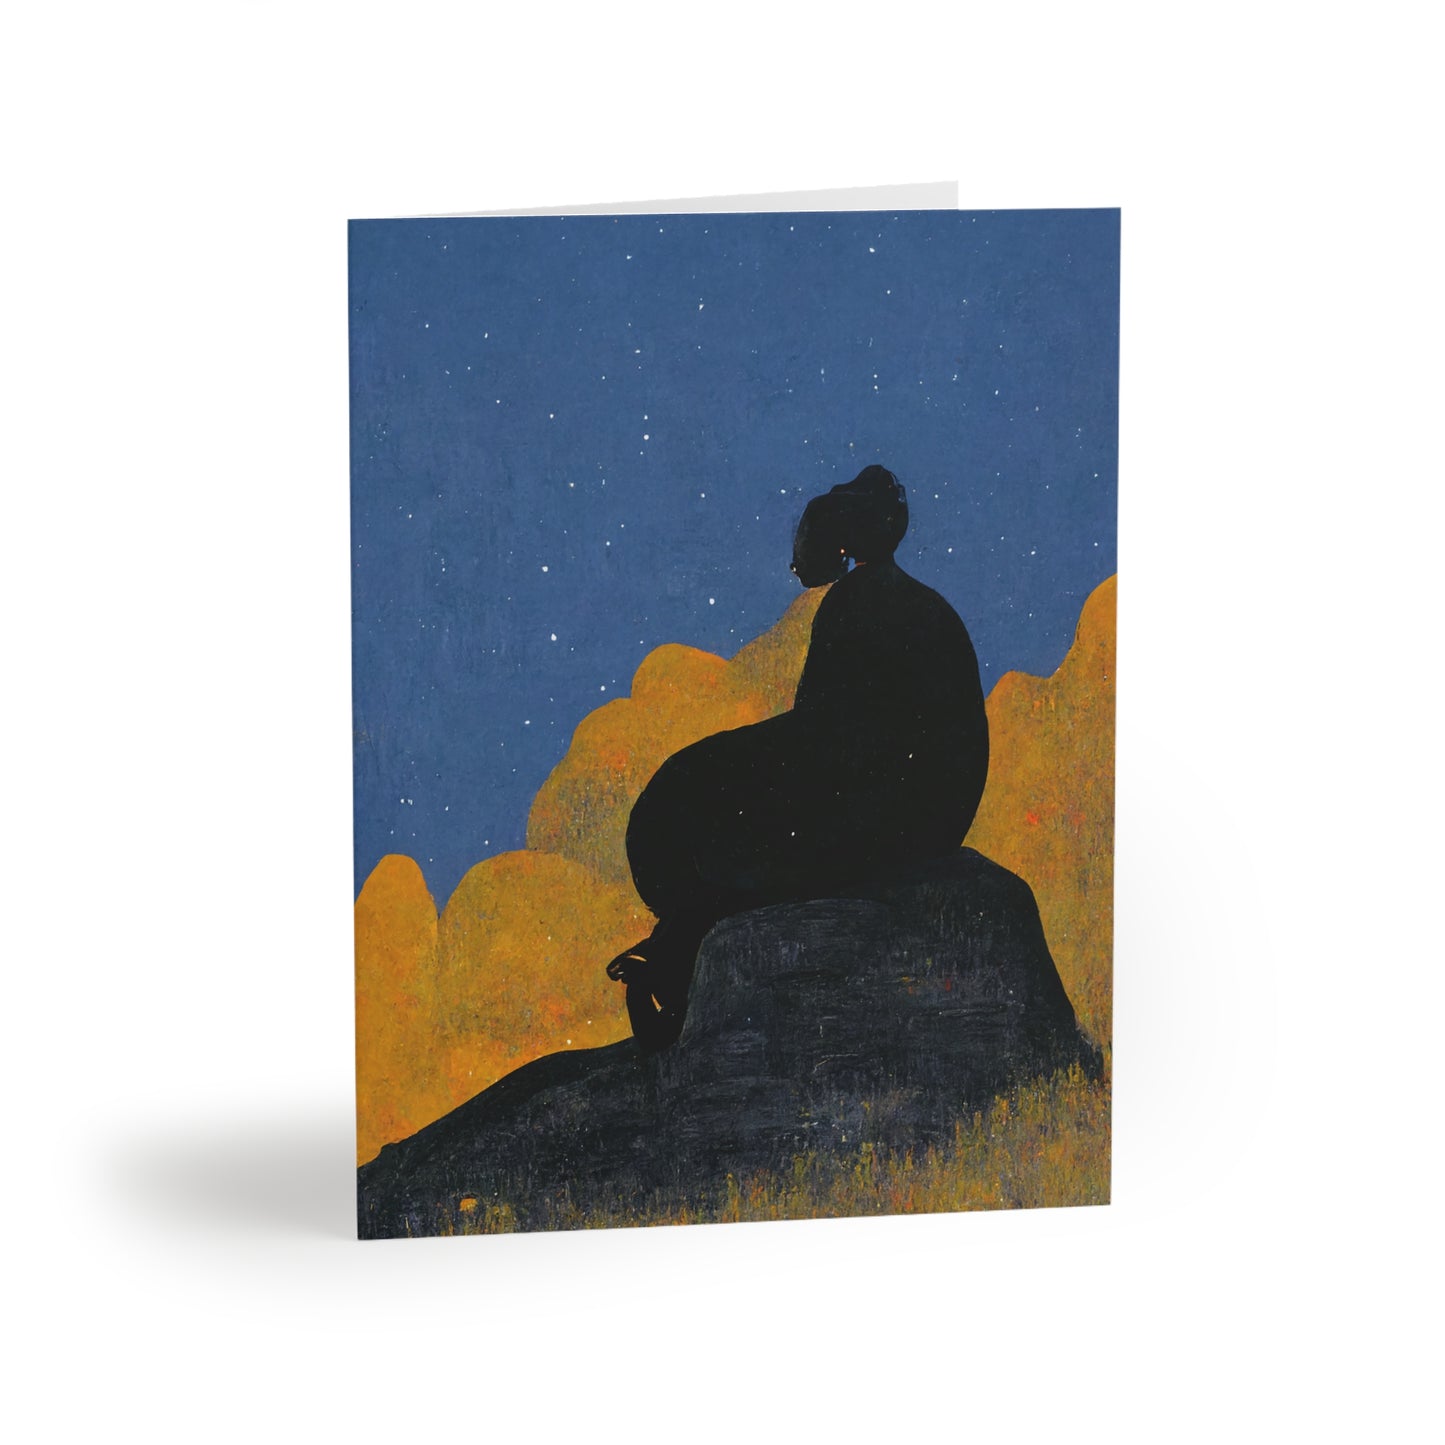 "Stargazing" Greeting cards (8, 16, and 24 pcs)